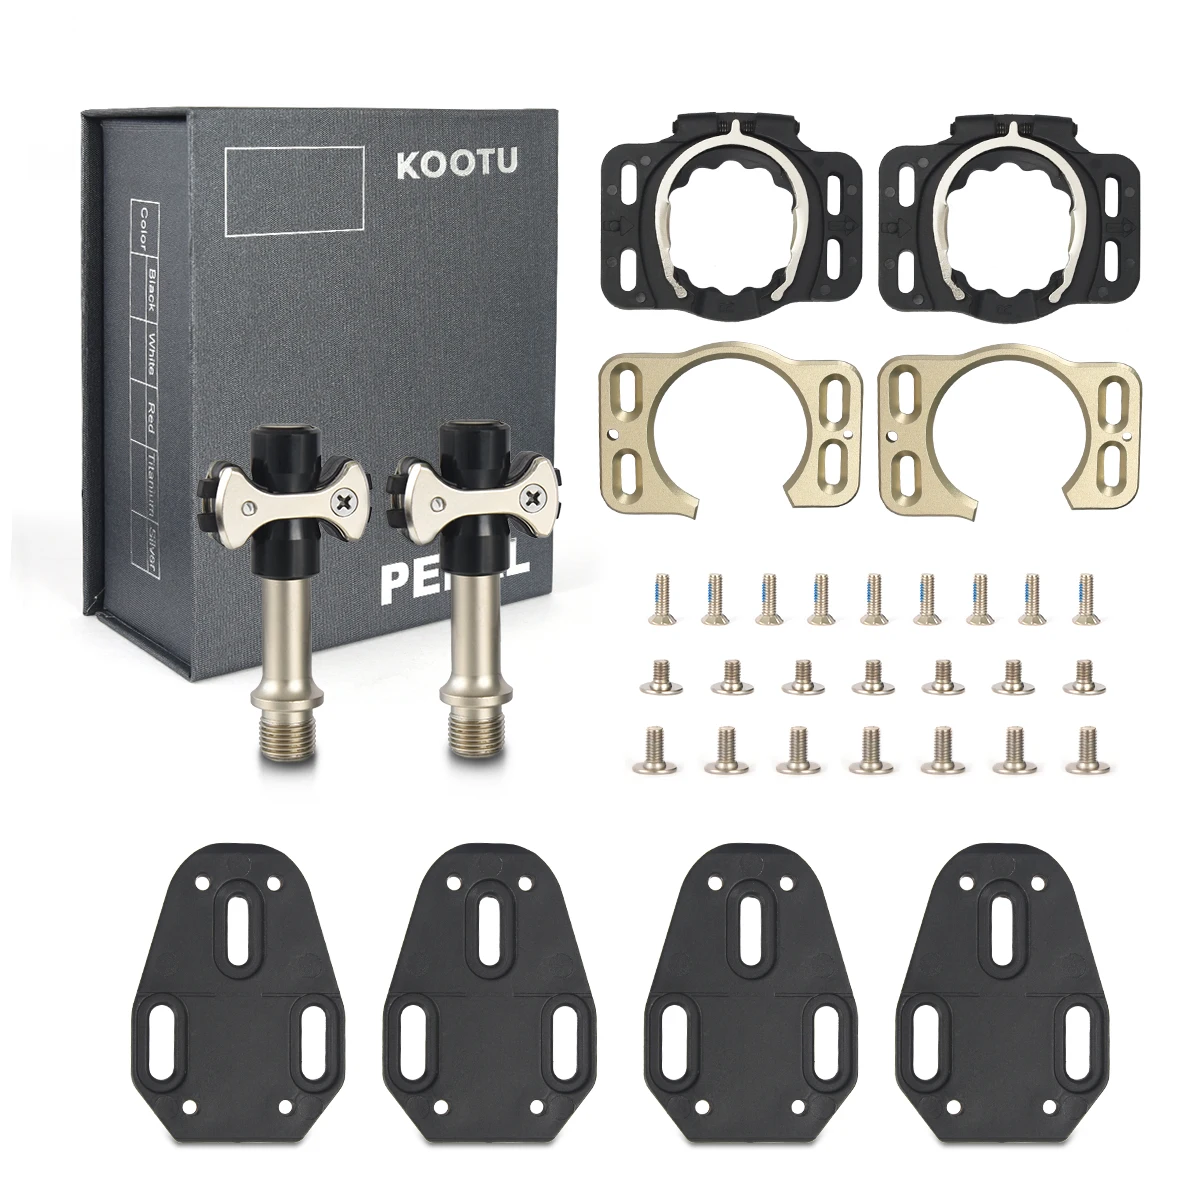 KOOTU titanium pedals road bike lock pedals Super light with 3 sealed bearings track sprint road bike special pedals